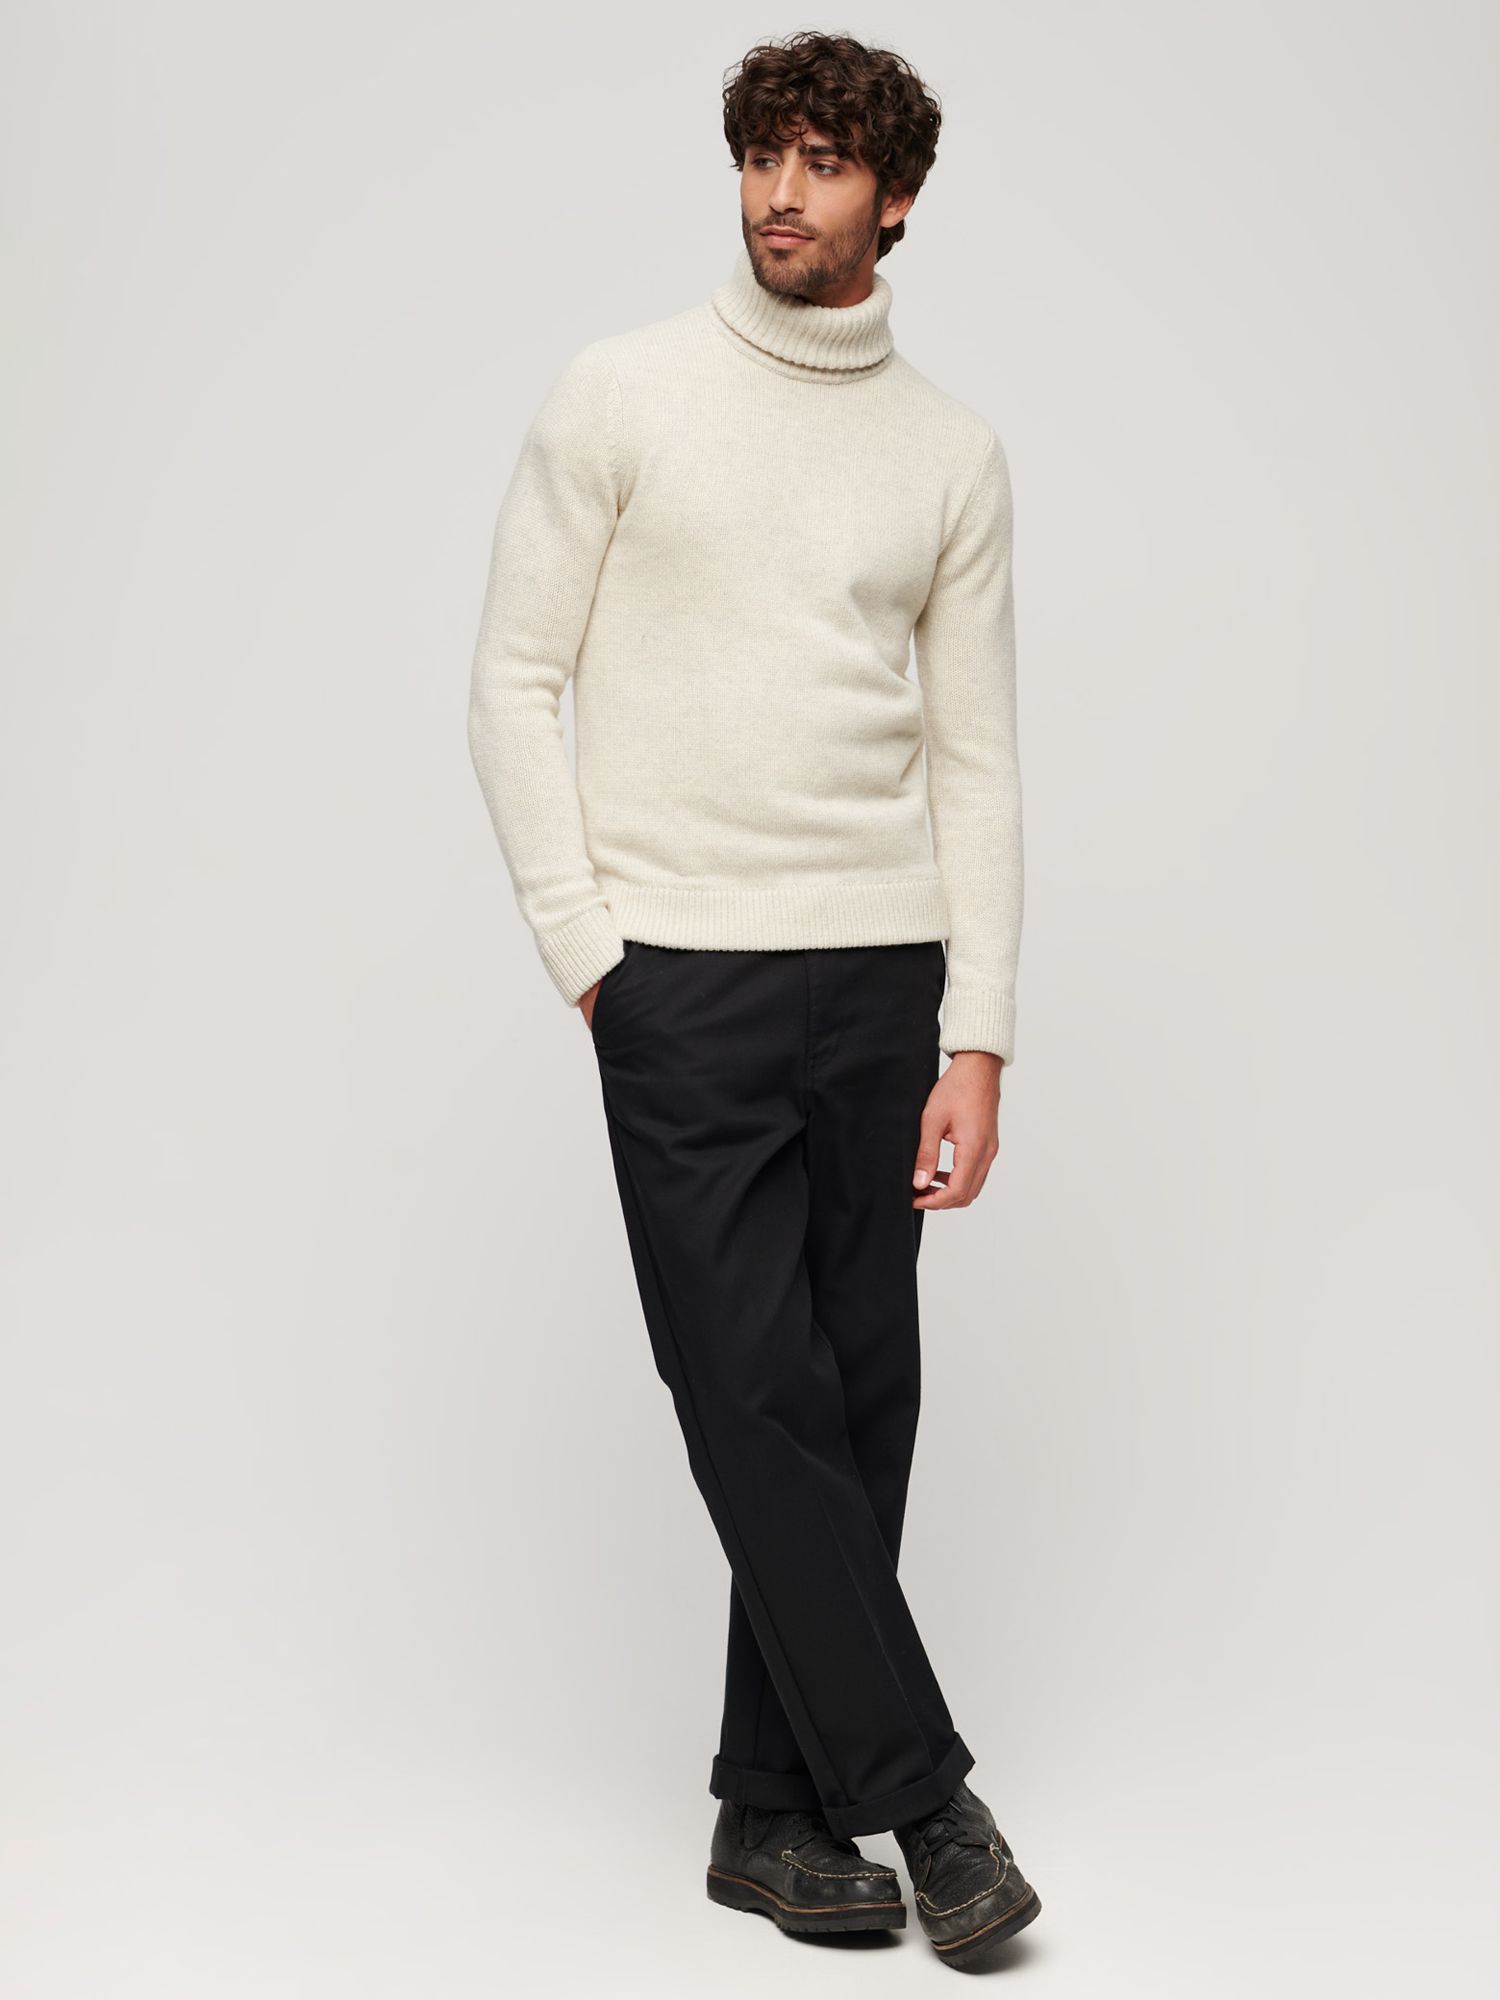 Superdry Roll Neck Jumper, Oatmeal at John Lewis & Partners